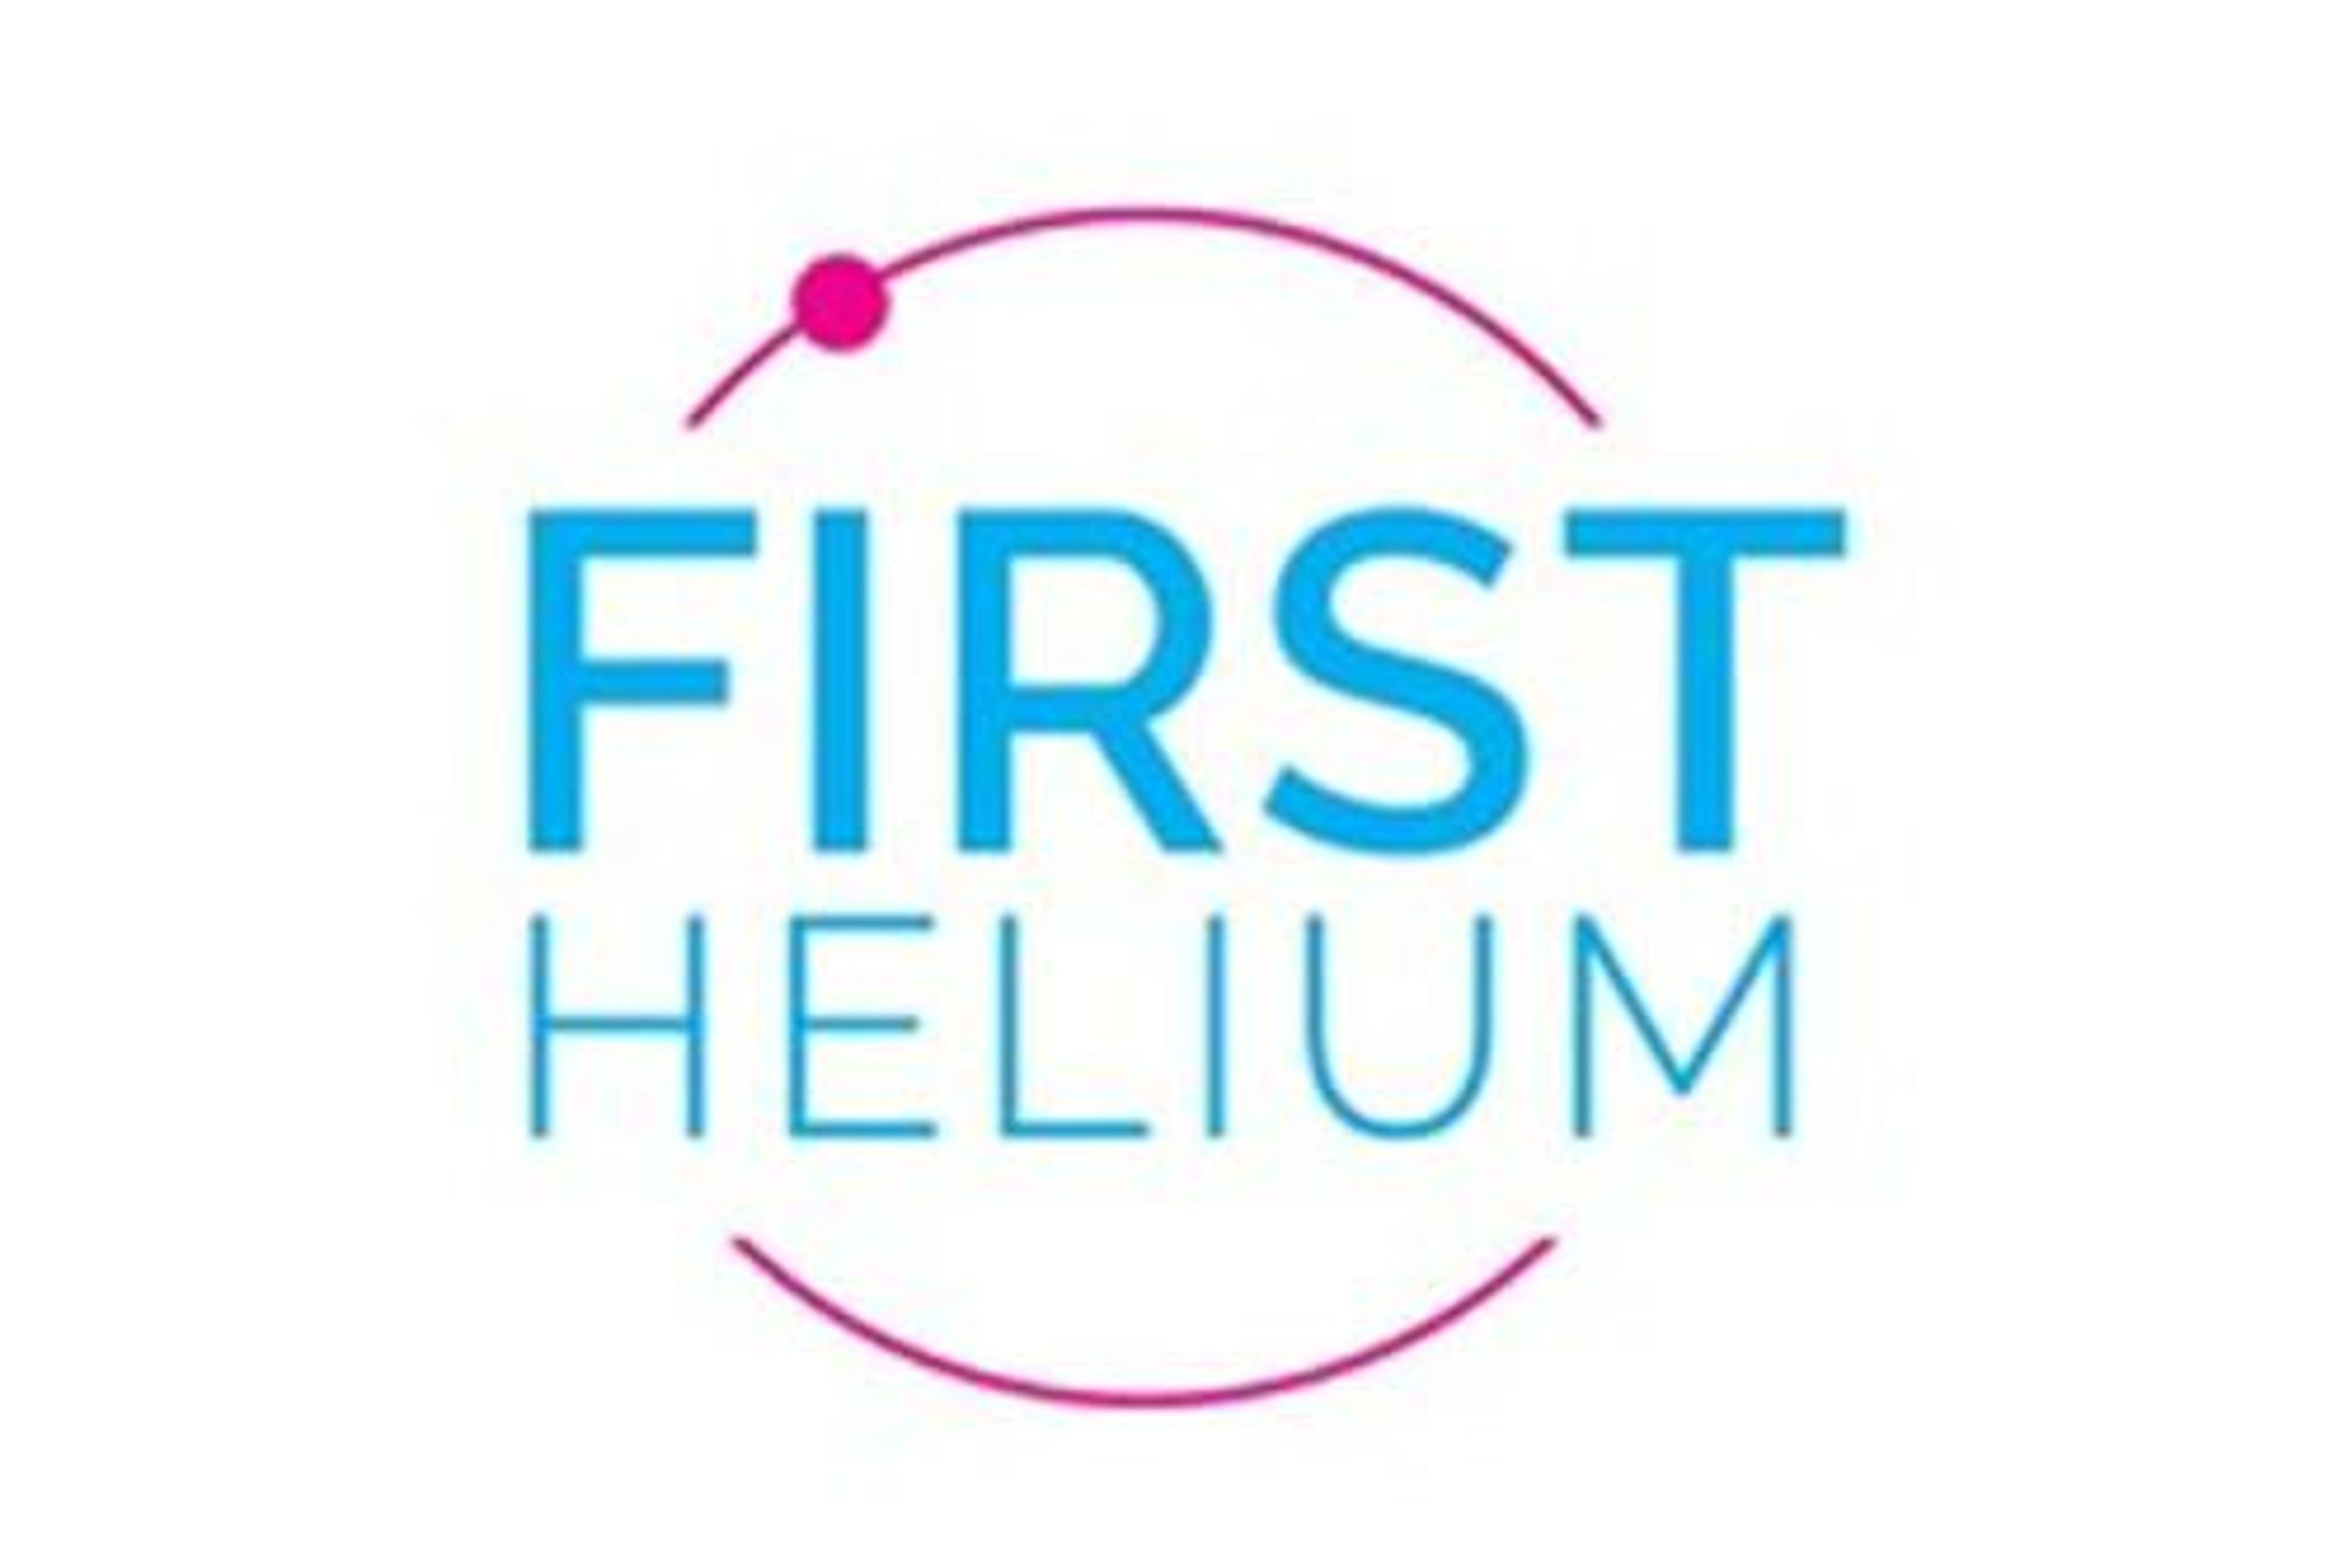 First Helium 1-30 Oil Well Production Update